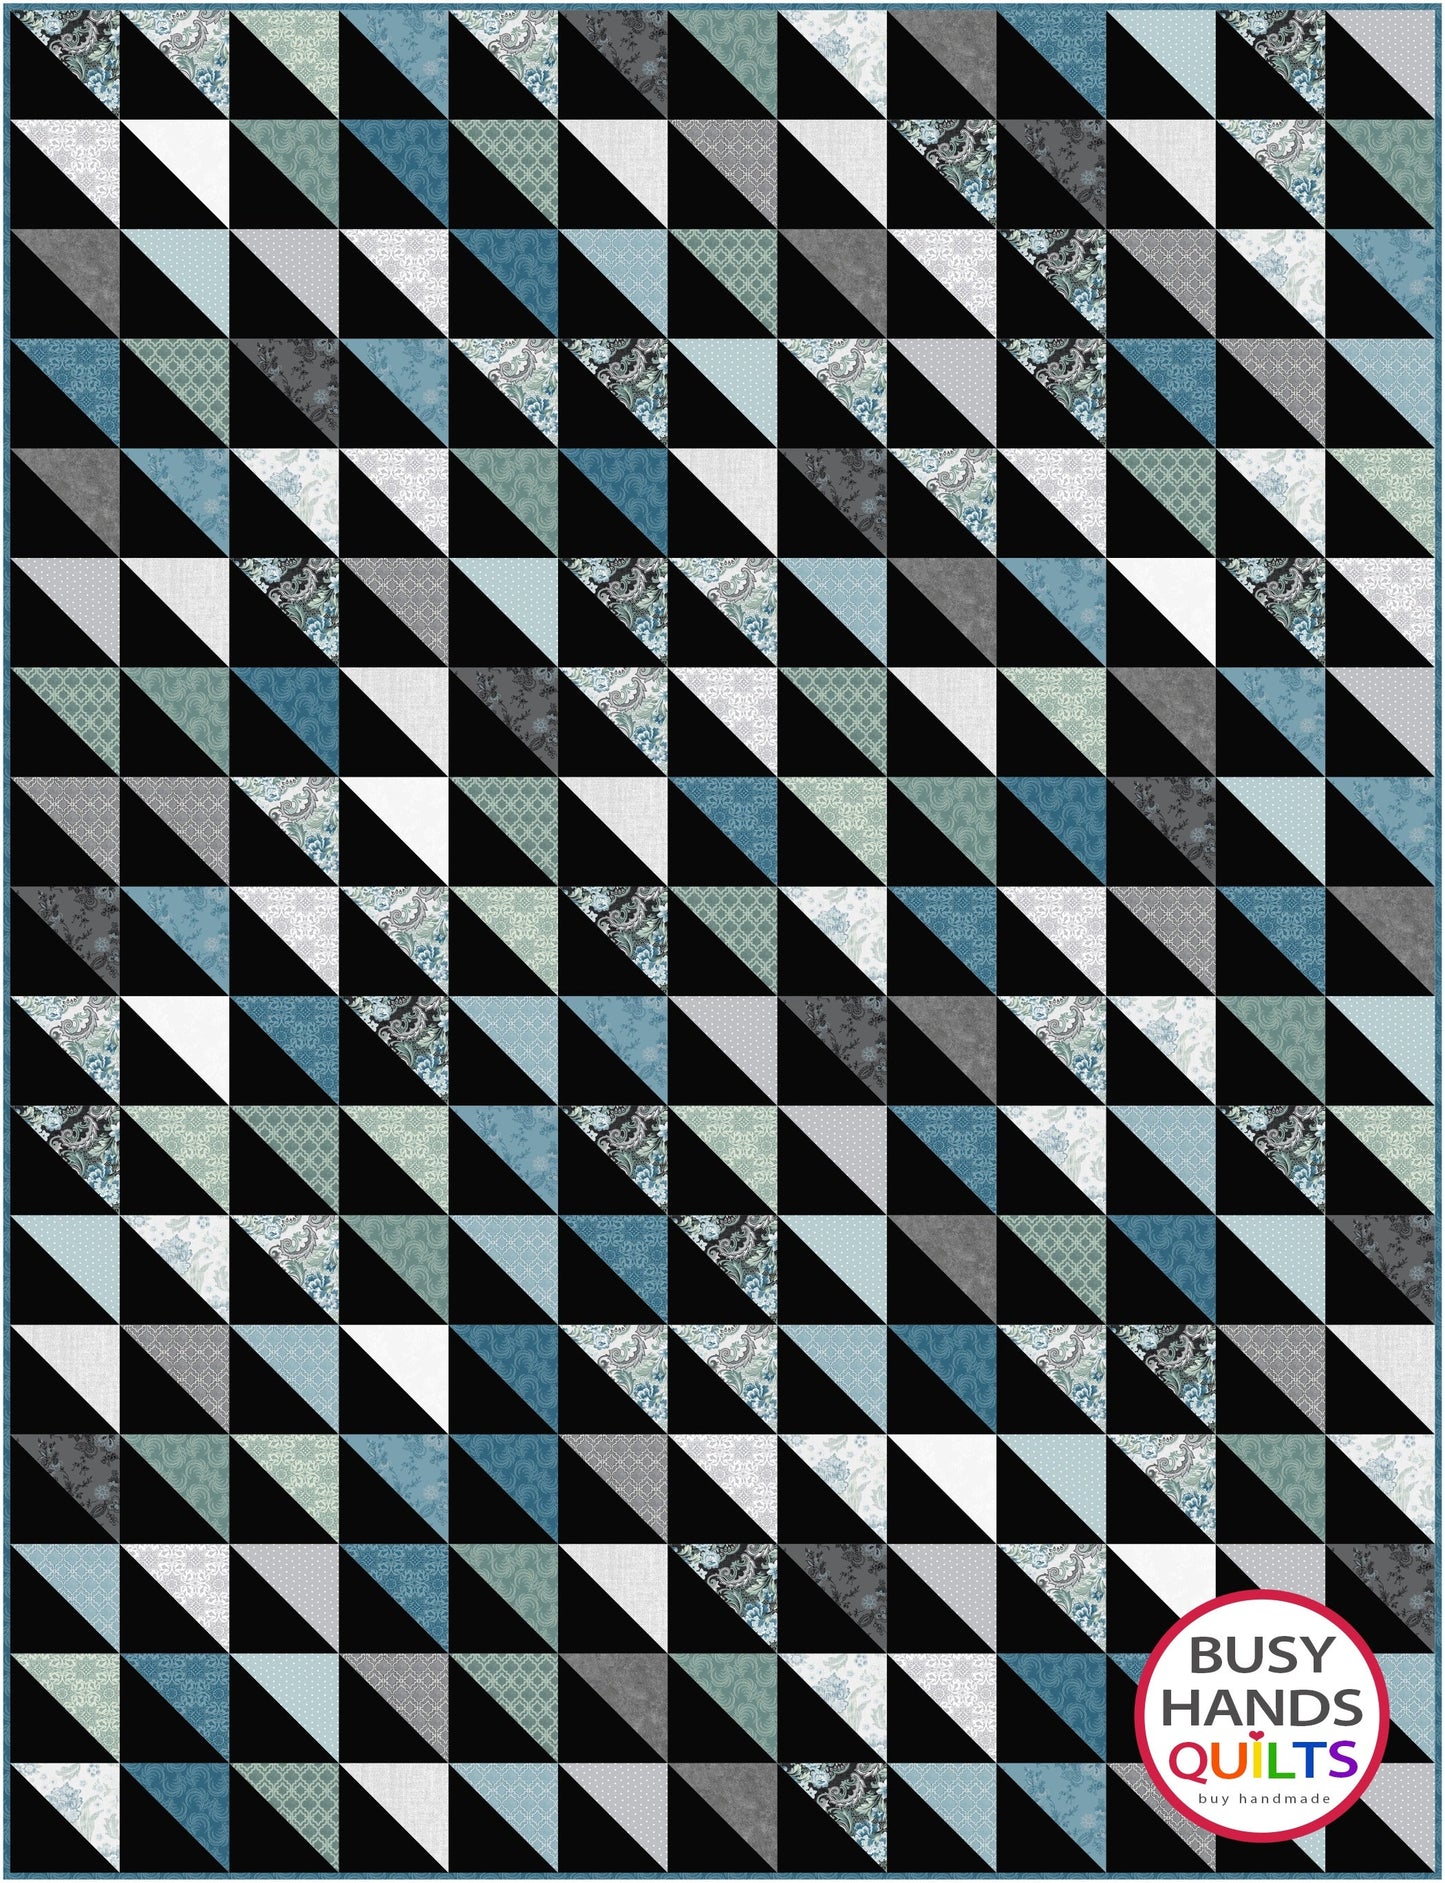 Simplicity Quilt Pattern PDF DOWNLOAD Busy Hands Quilts $12.99